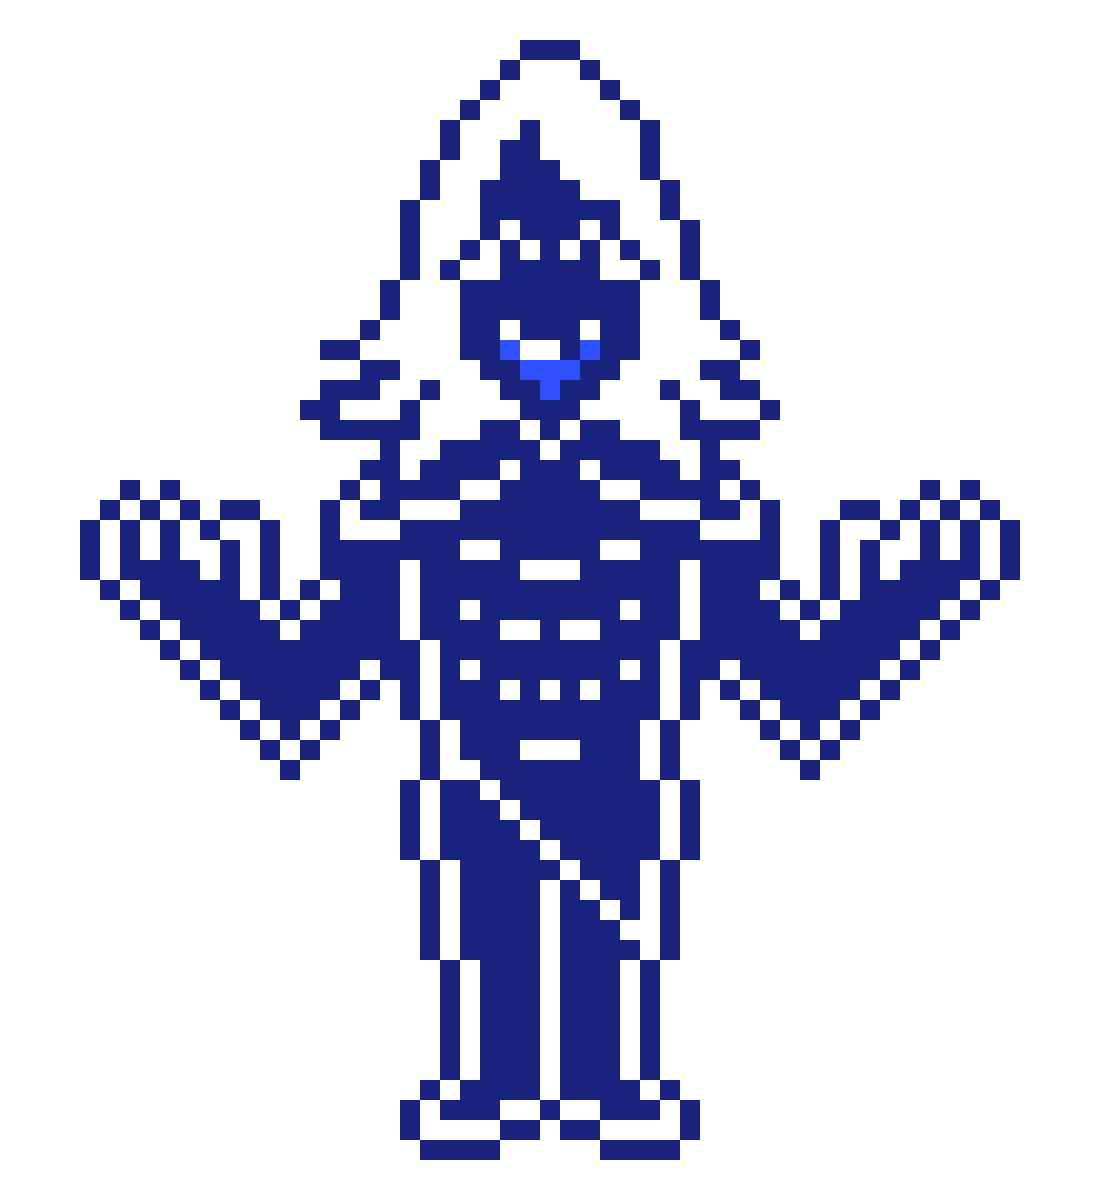 Rouxls Kaard will be the next sans. Every sprite of his has him smiling,  just like sans. he is a comedic relief character like sans who was not  being sussed until mettaton's